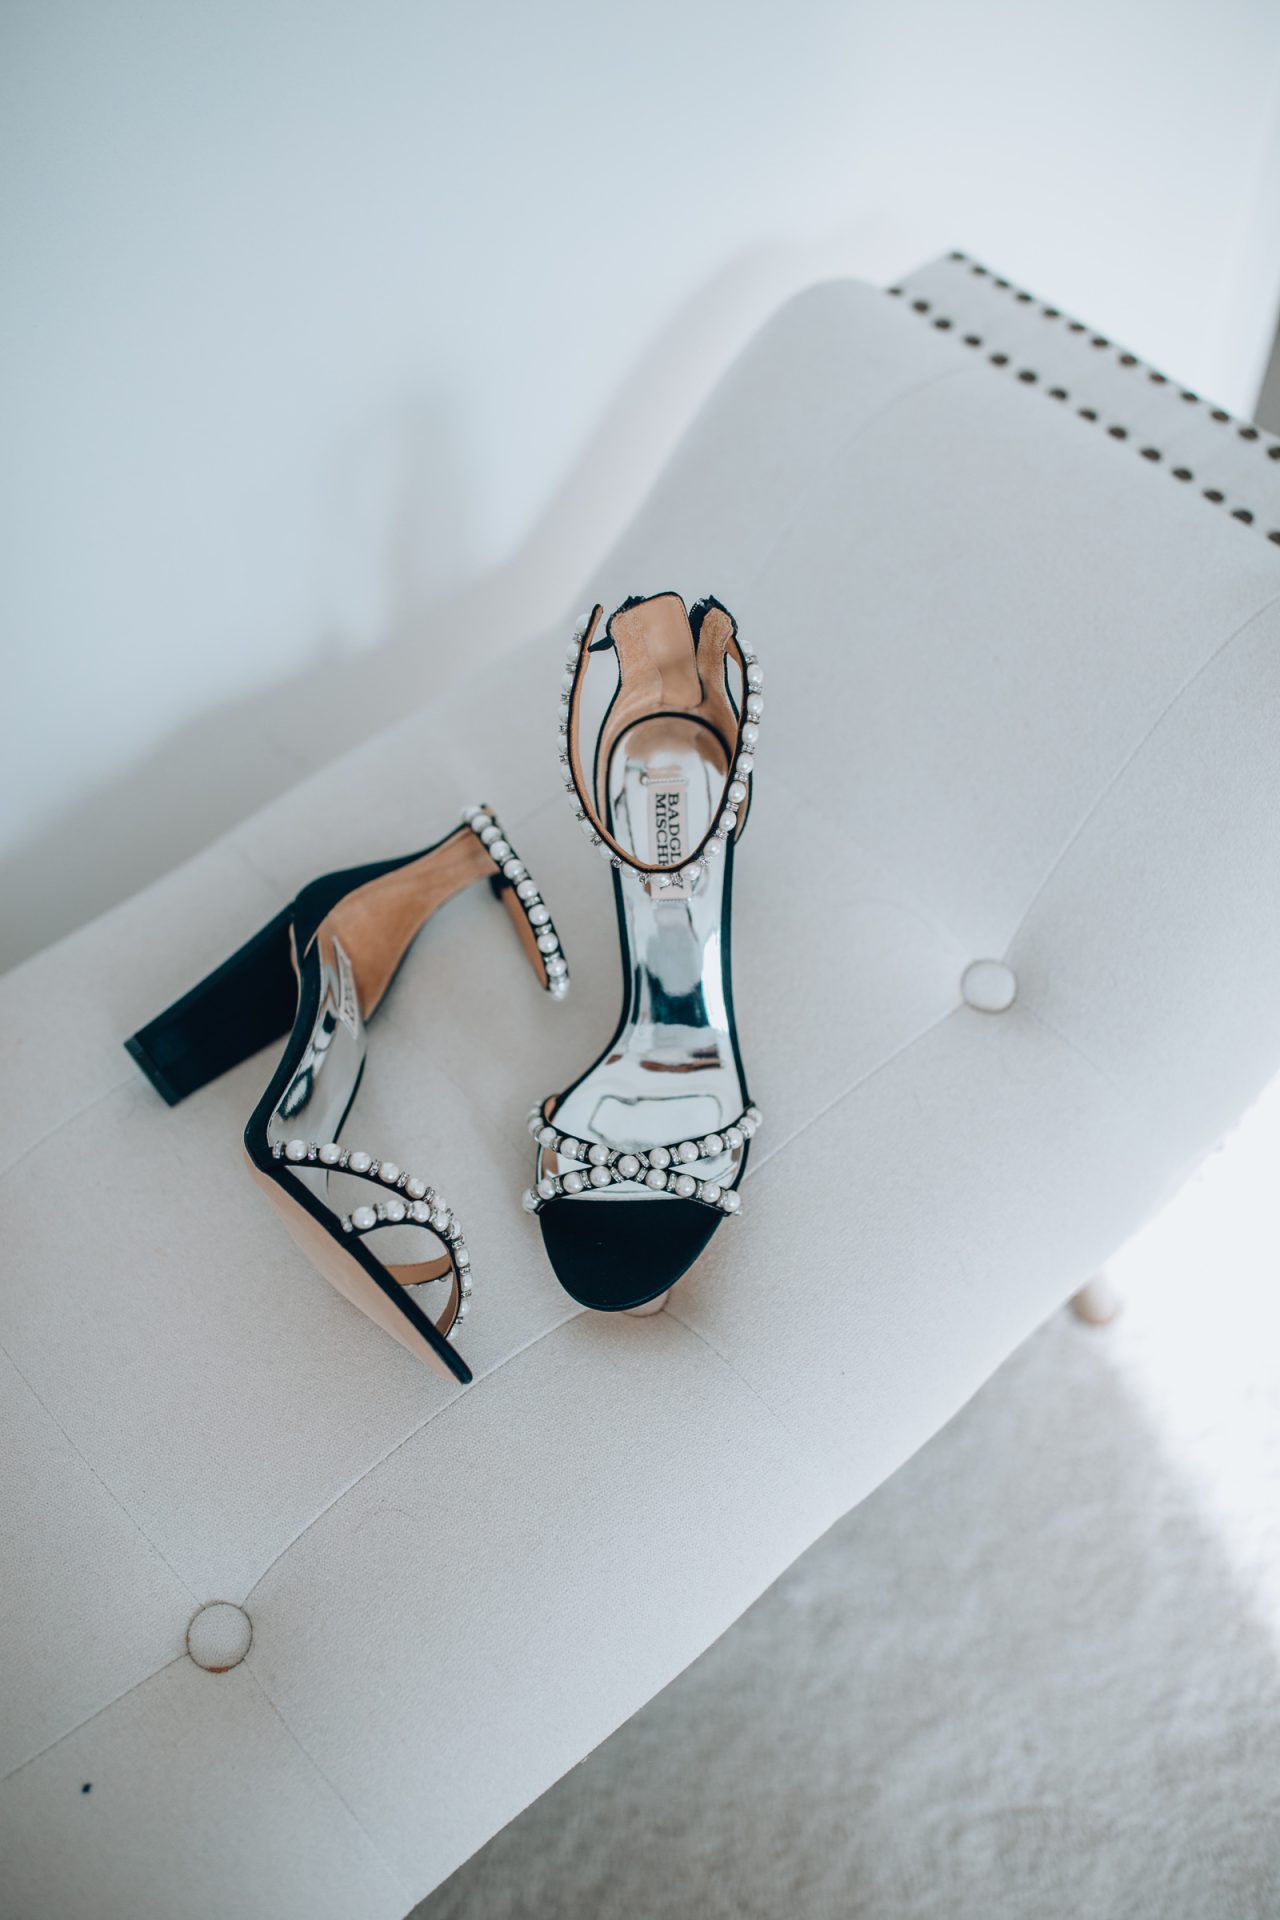 Chicago style blogger shares 6 spring items that shes currently loving, including: rothschild beauty, badgley mischka pearl shoes, vegan makeup & more!